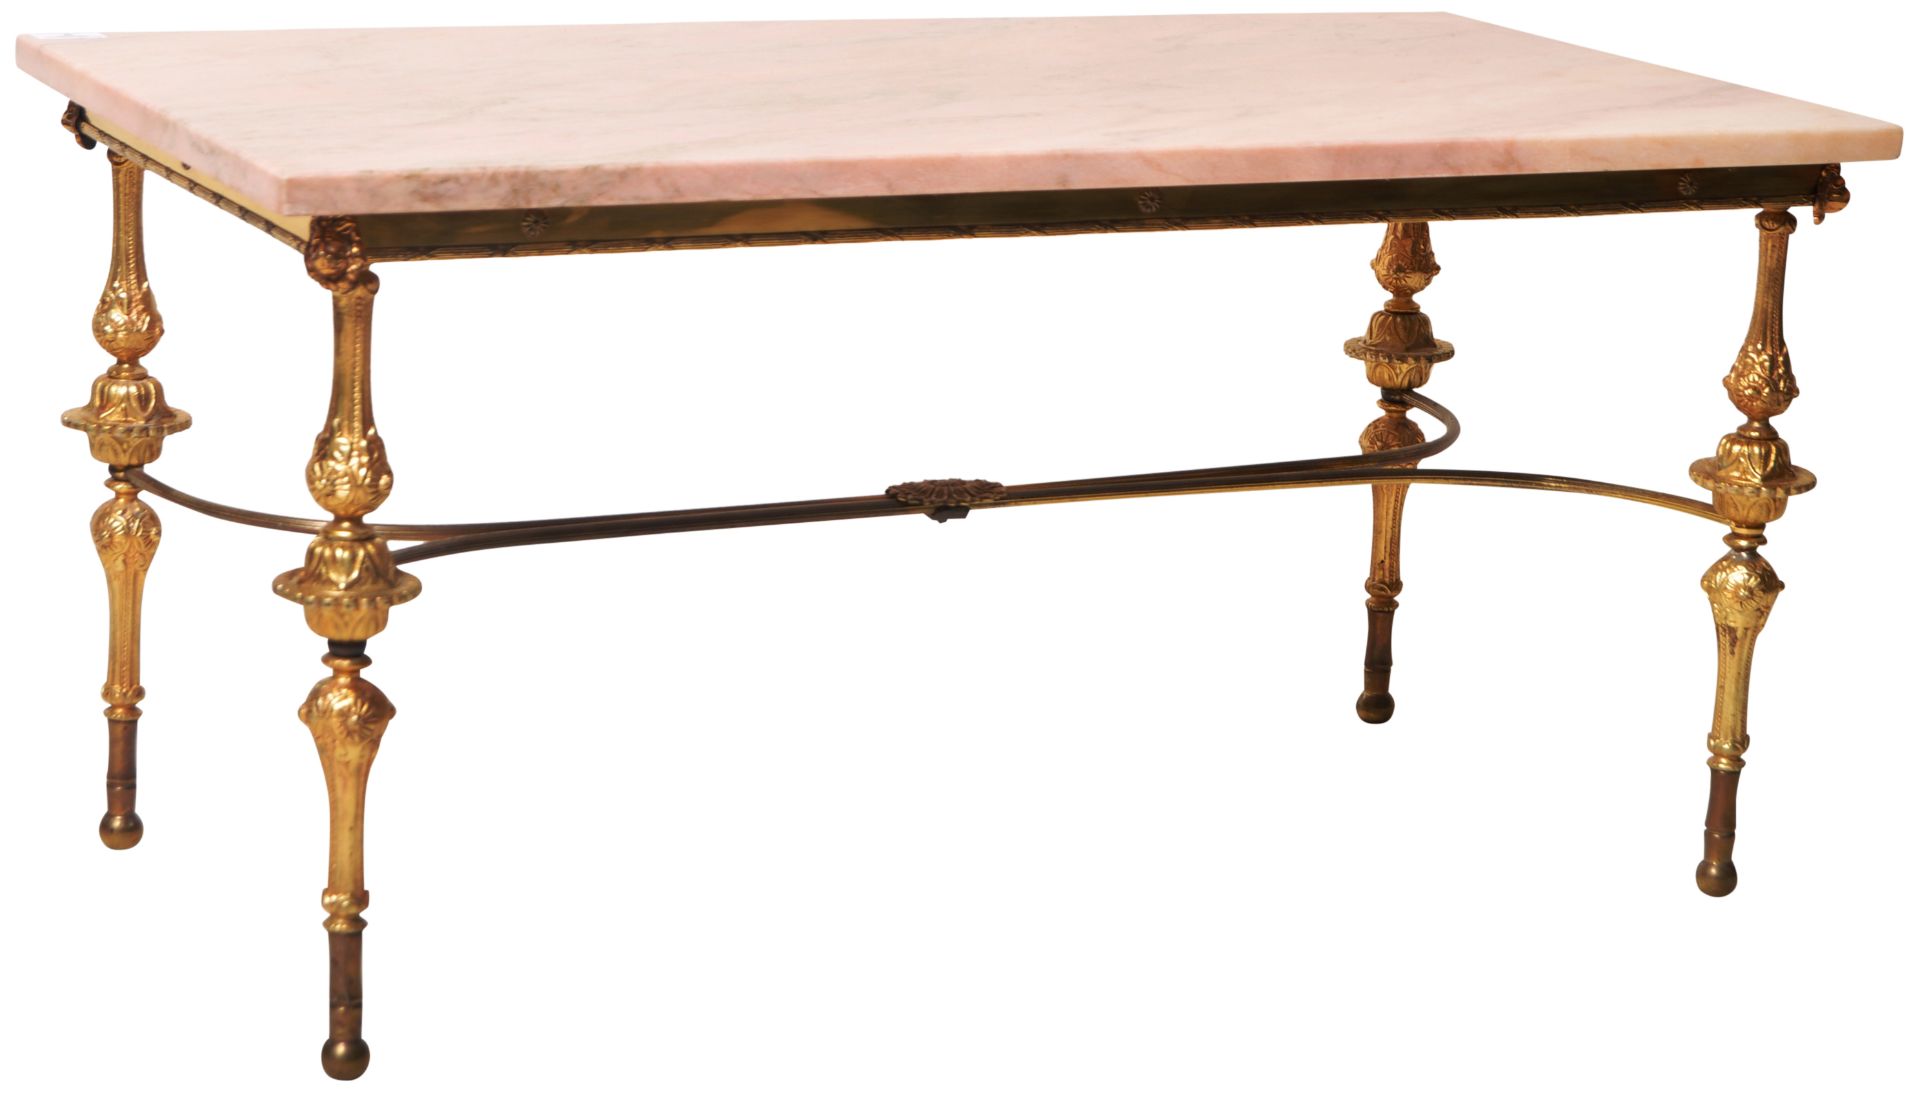 MID 20TH CENTURY HOLLYWOOD REGENCY PINK MARBLE AND BRASS COFFEE TABLE